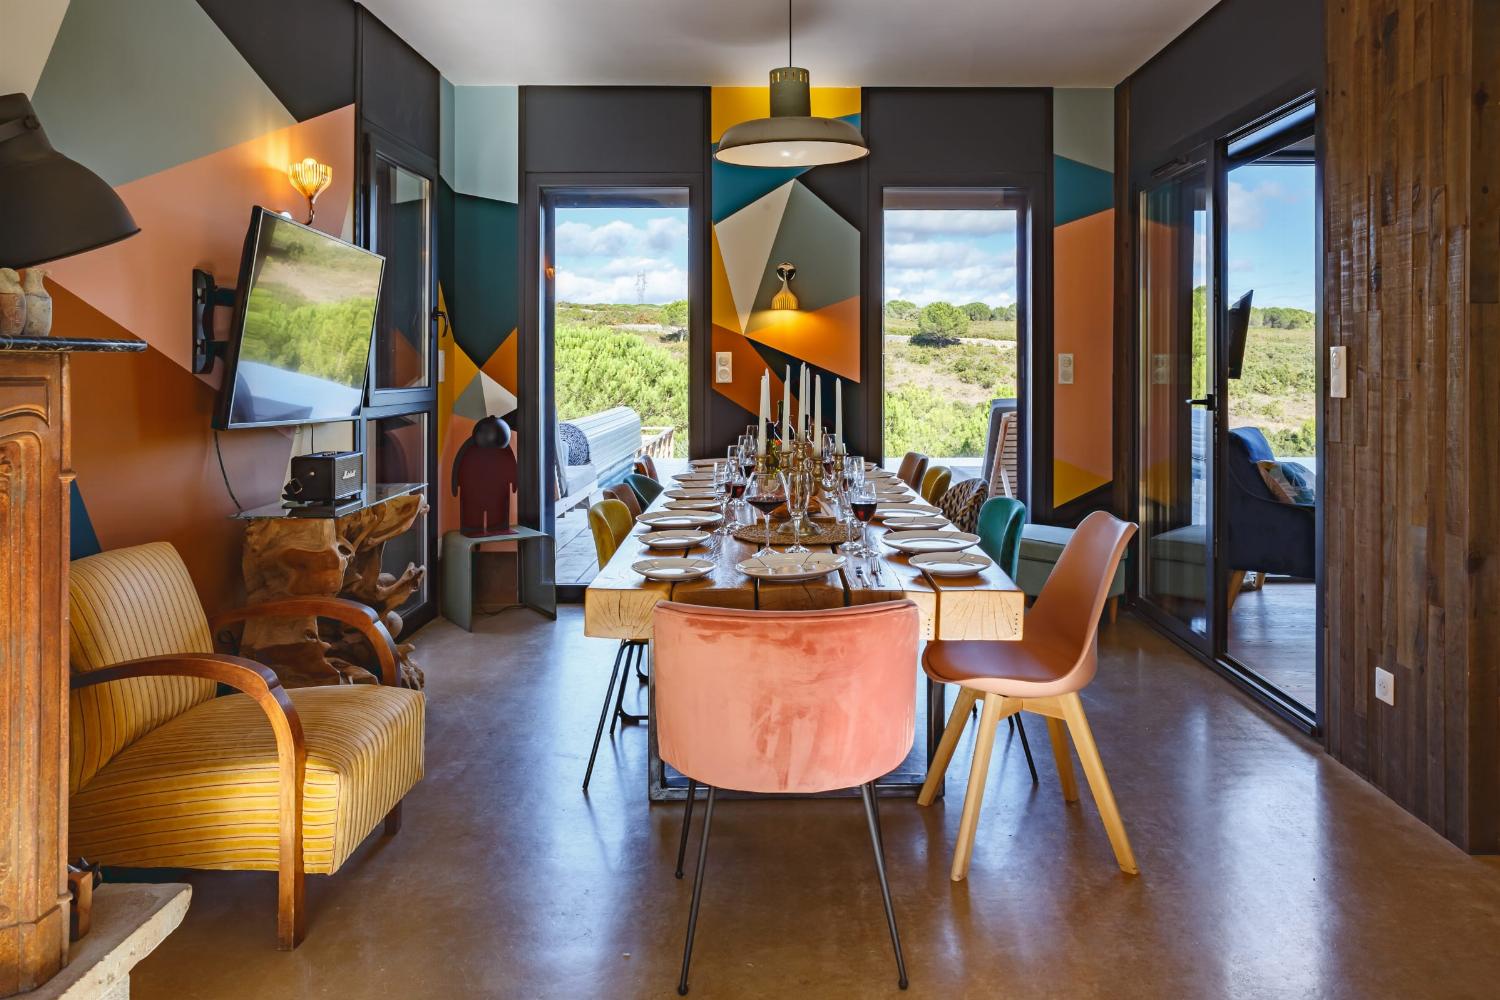 Dining room | Vacation home in the South of France